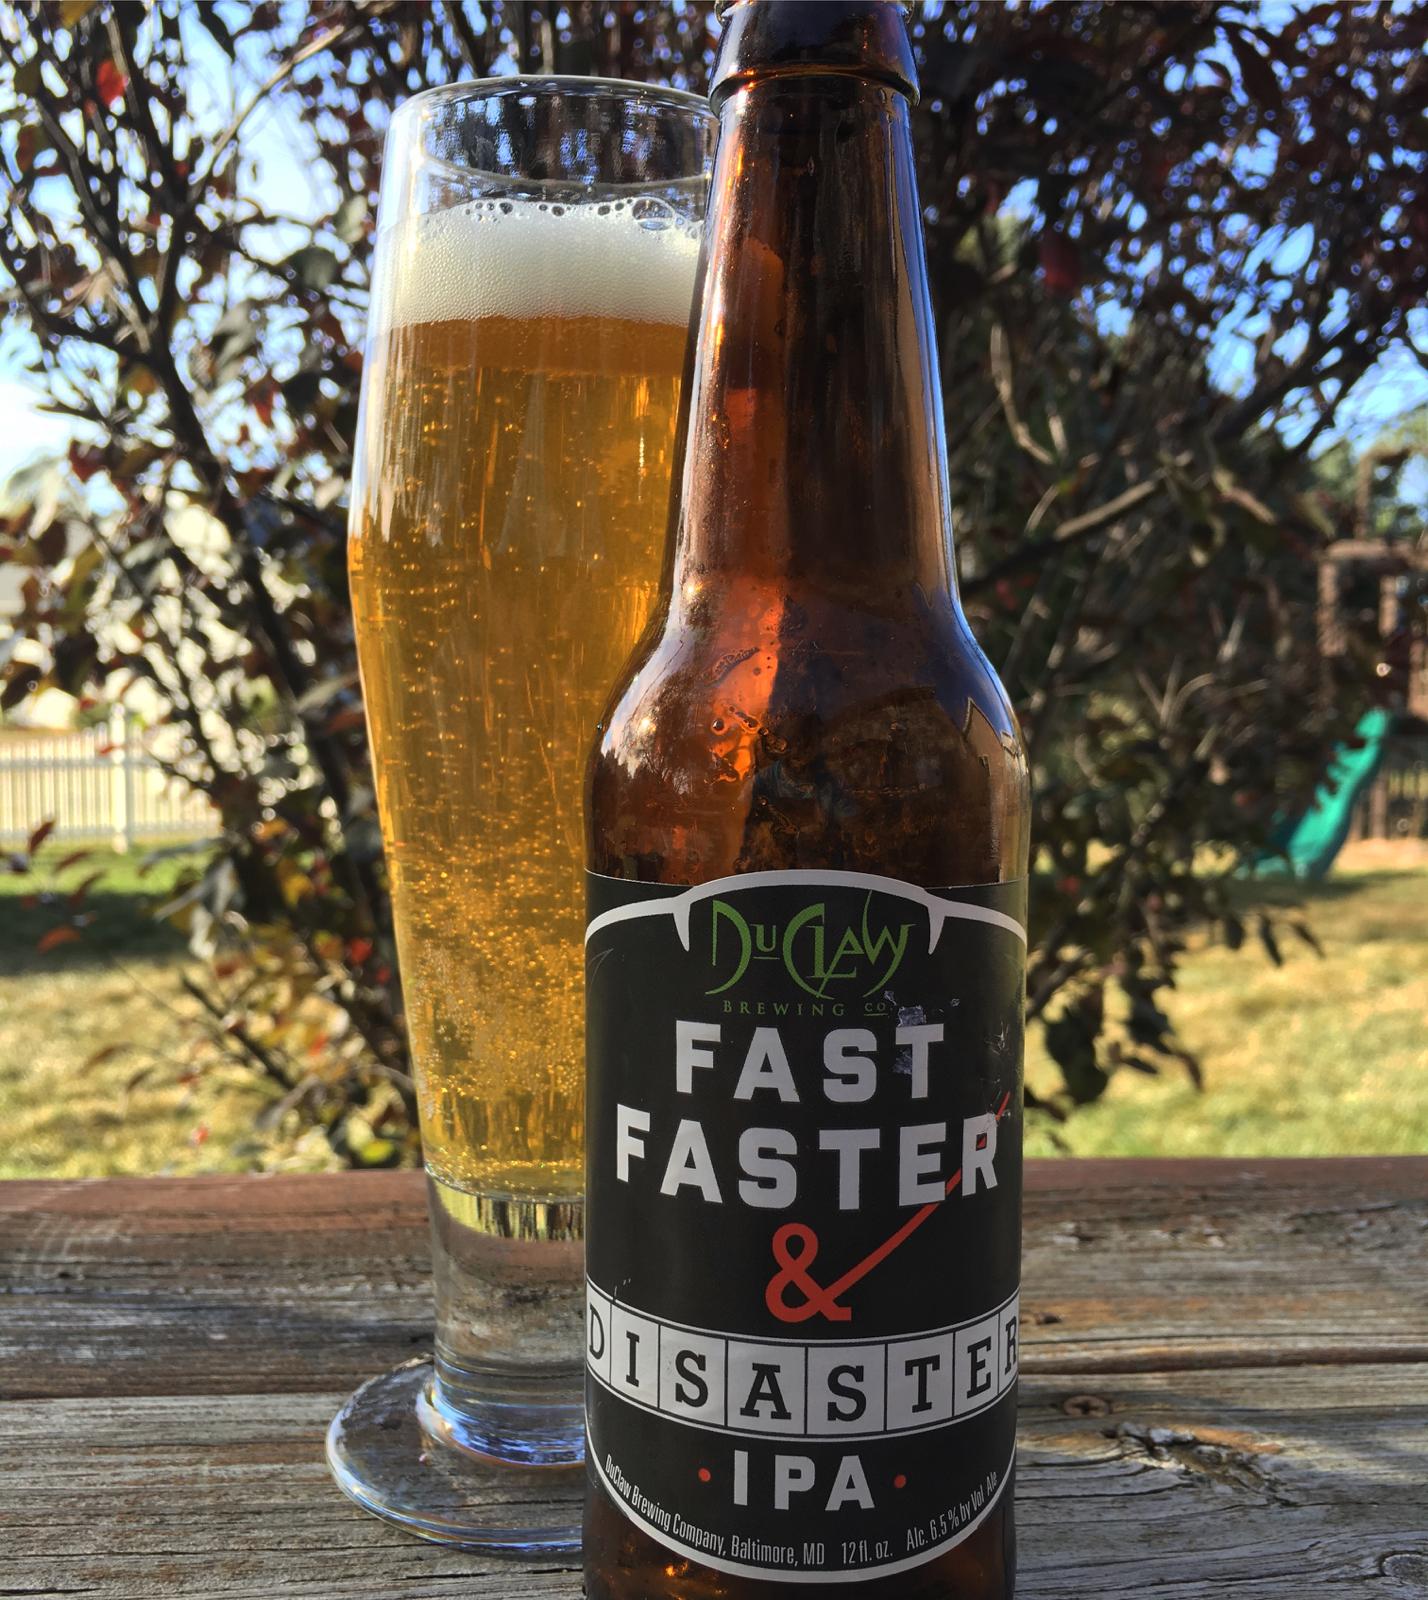 Fast Faster & Disaster IPA